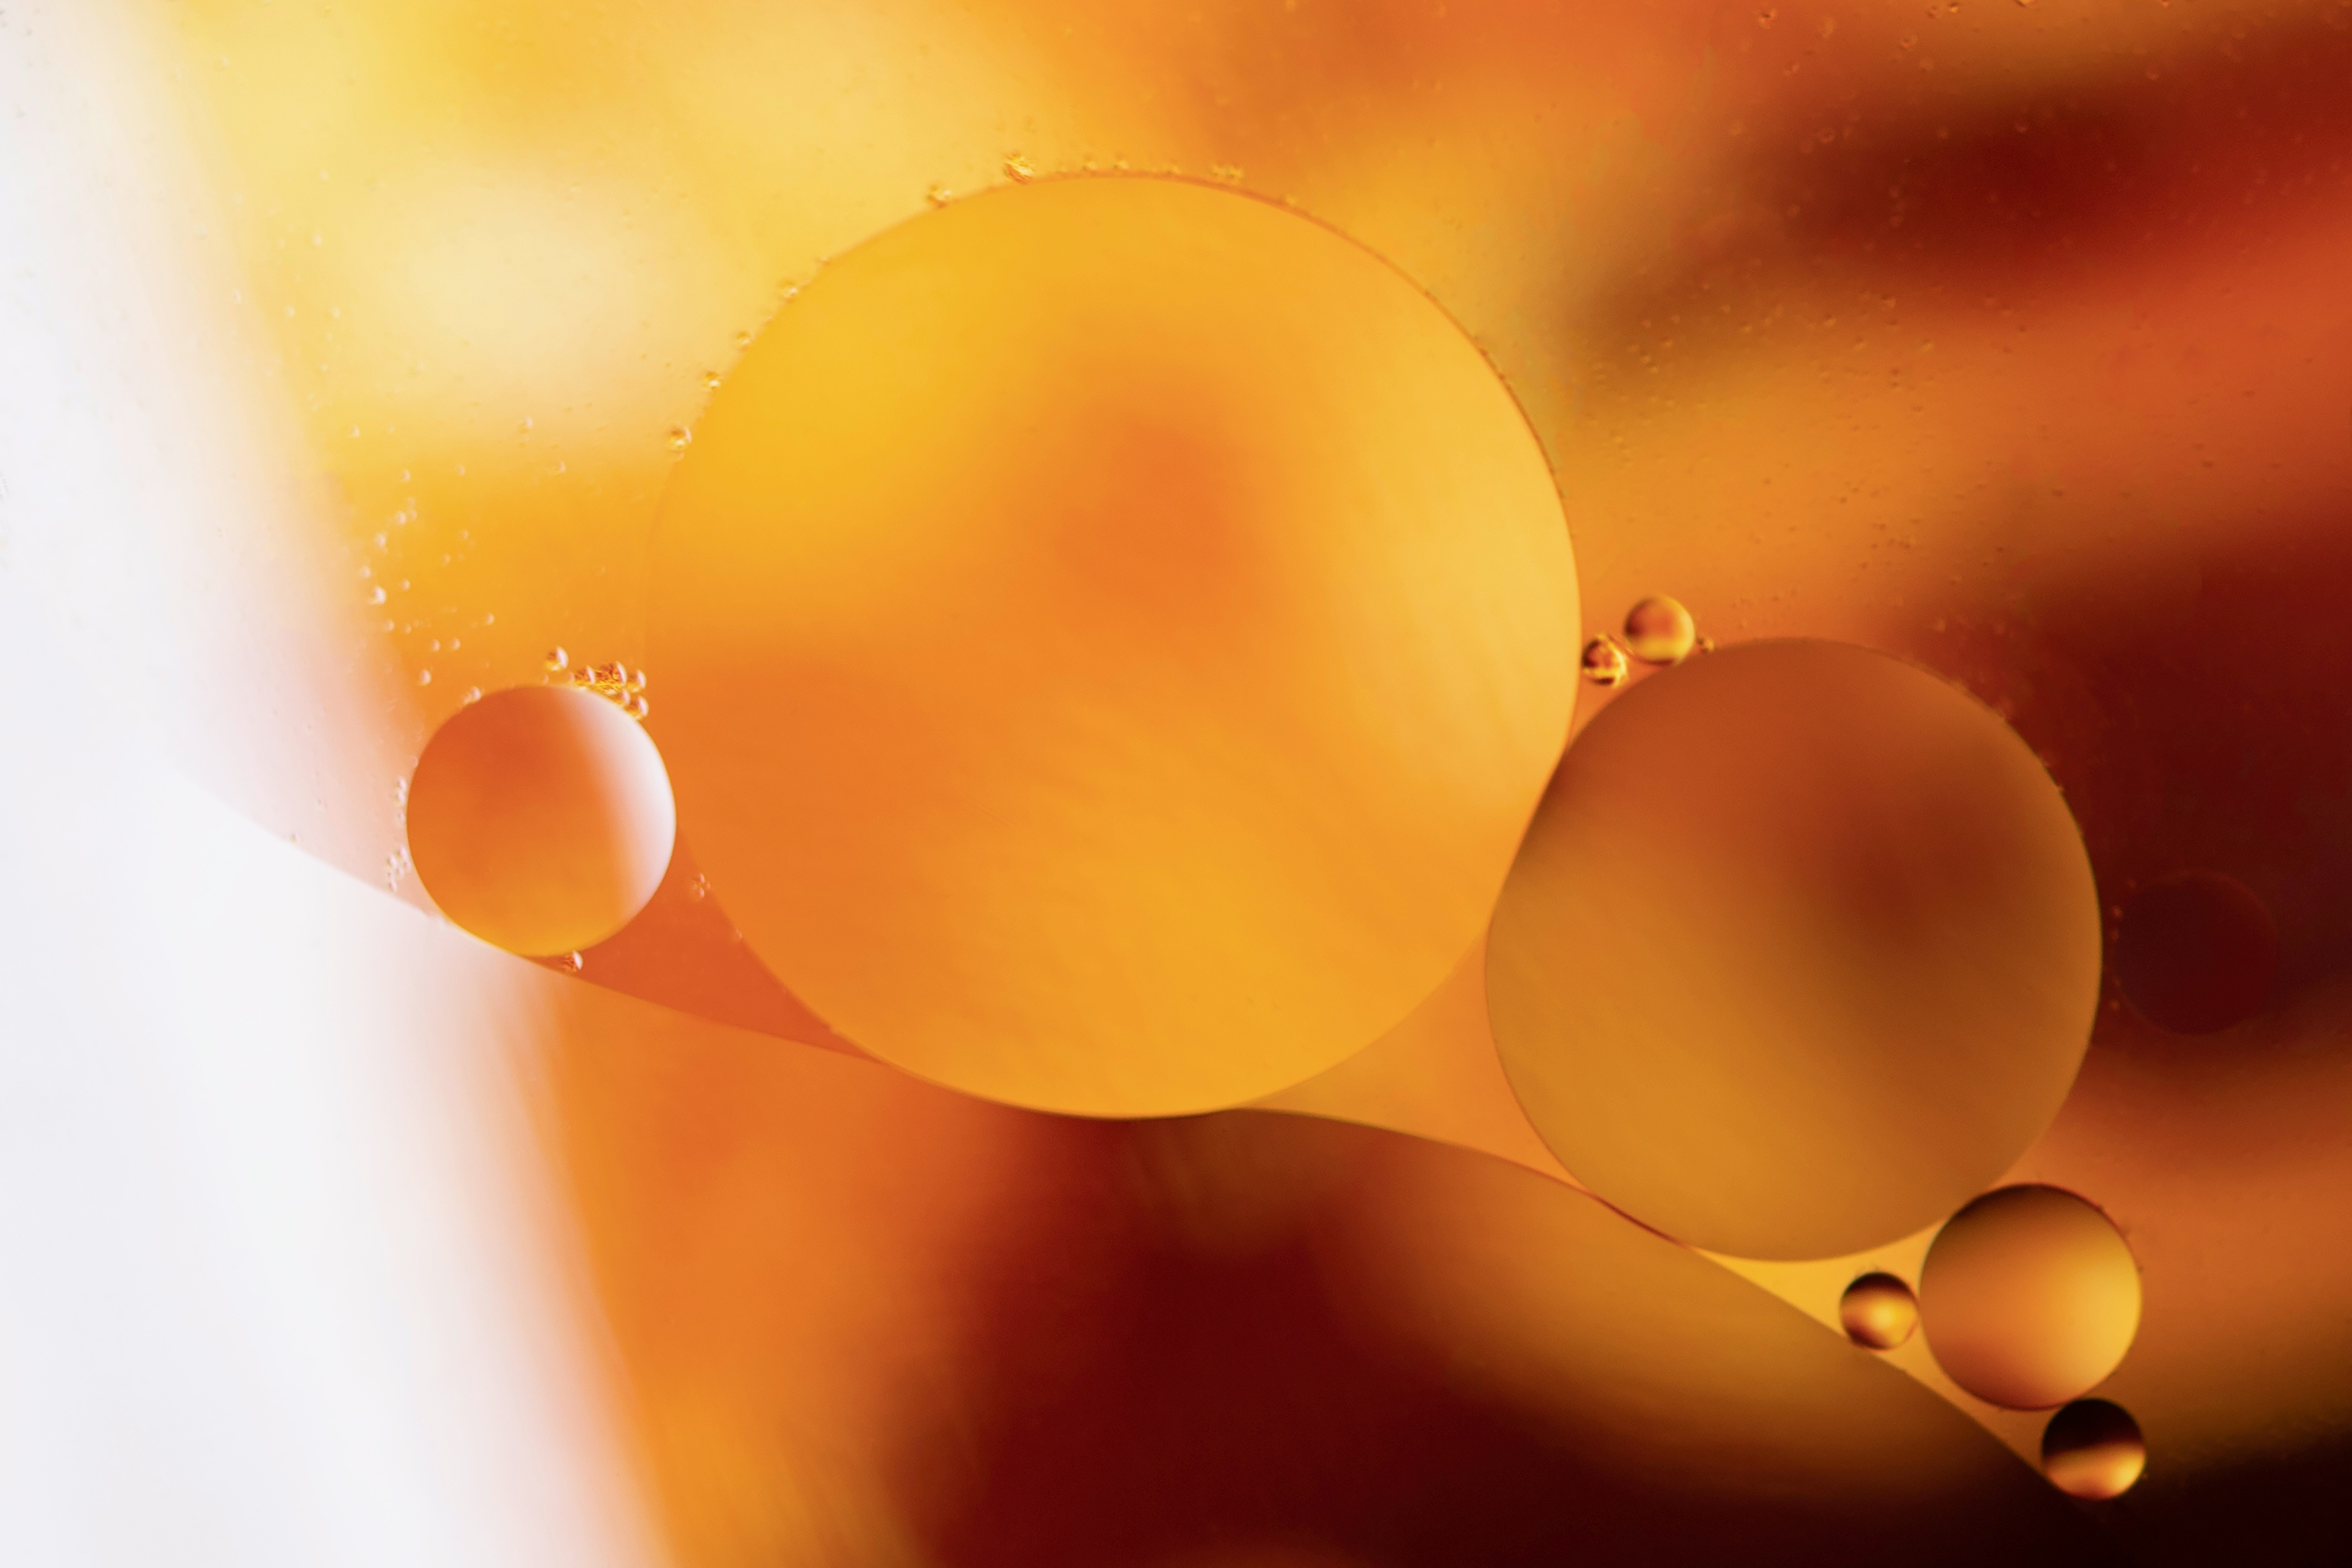 yellow balloons in close up photography